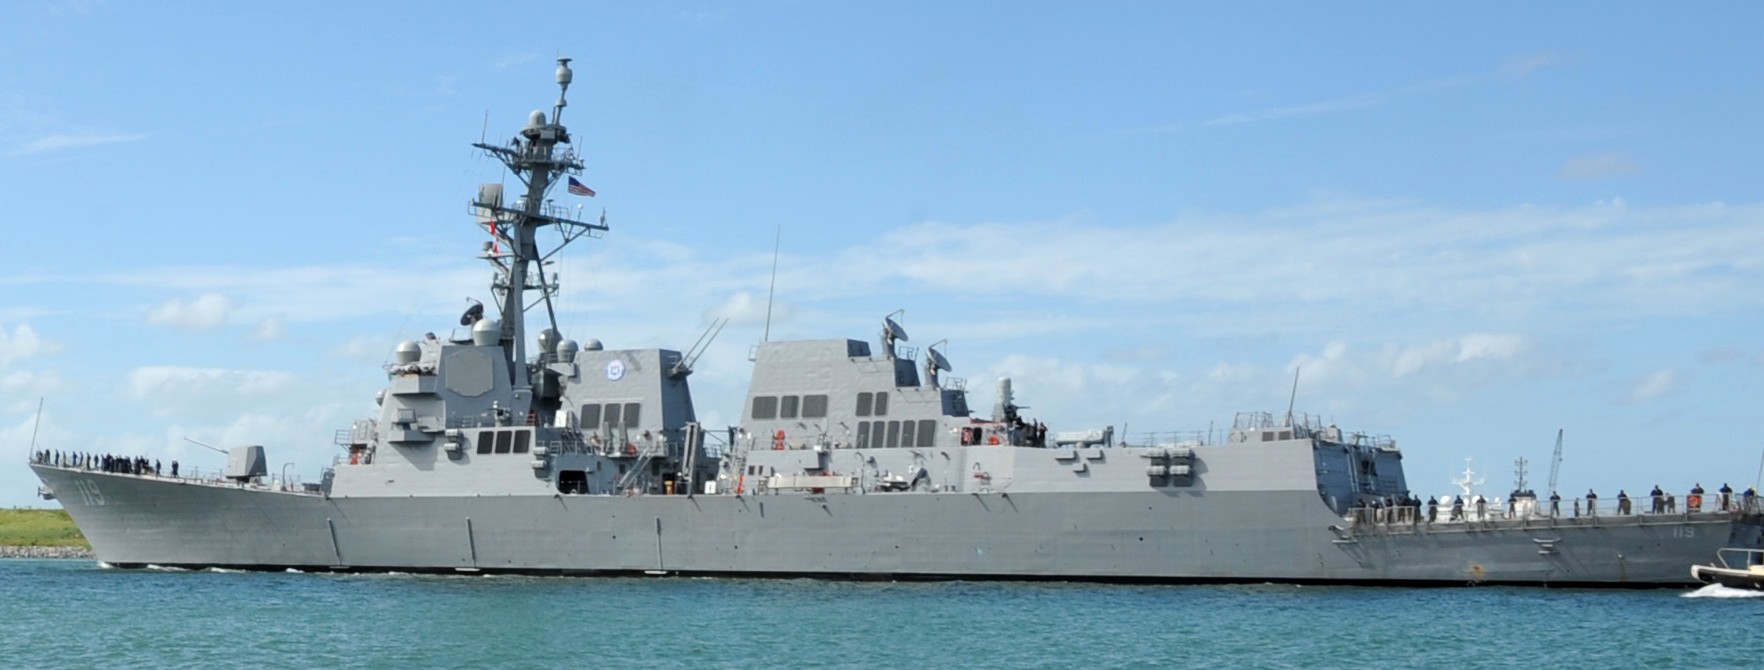 ddg-119 uss delbert d. black arleigh burke class guided missile destroyer us navy aegis port canaveral florida 08